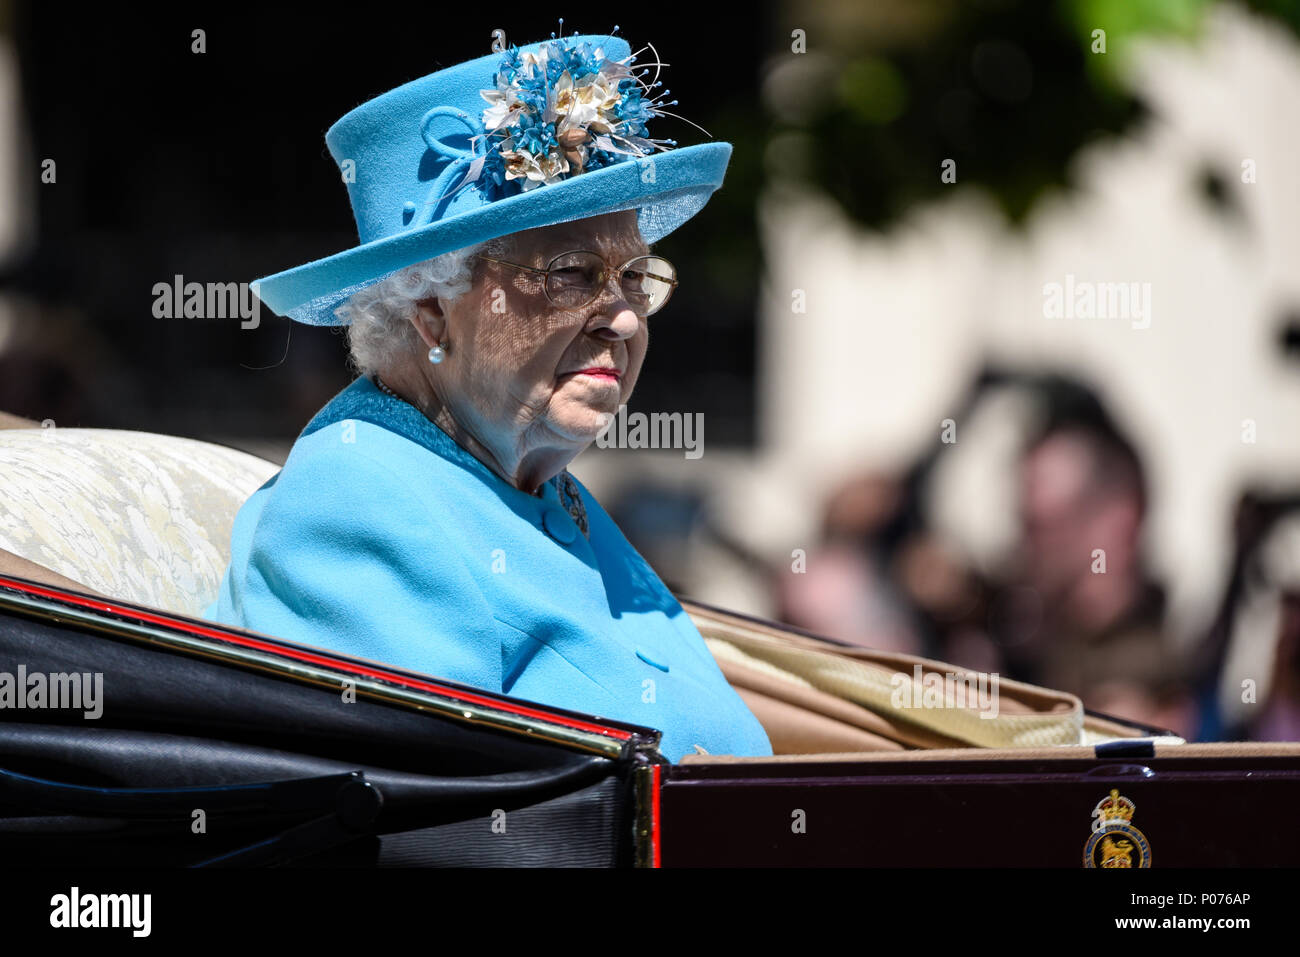 Trooping the Colour 2018. The Queen heading towards Horse Guards on her own in a carriage in The Mall, London,  in blue Angela Kelly design outfit. Space for copy Stock Photo